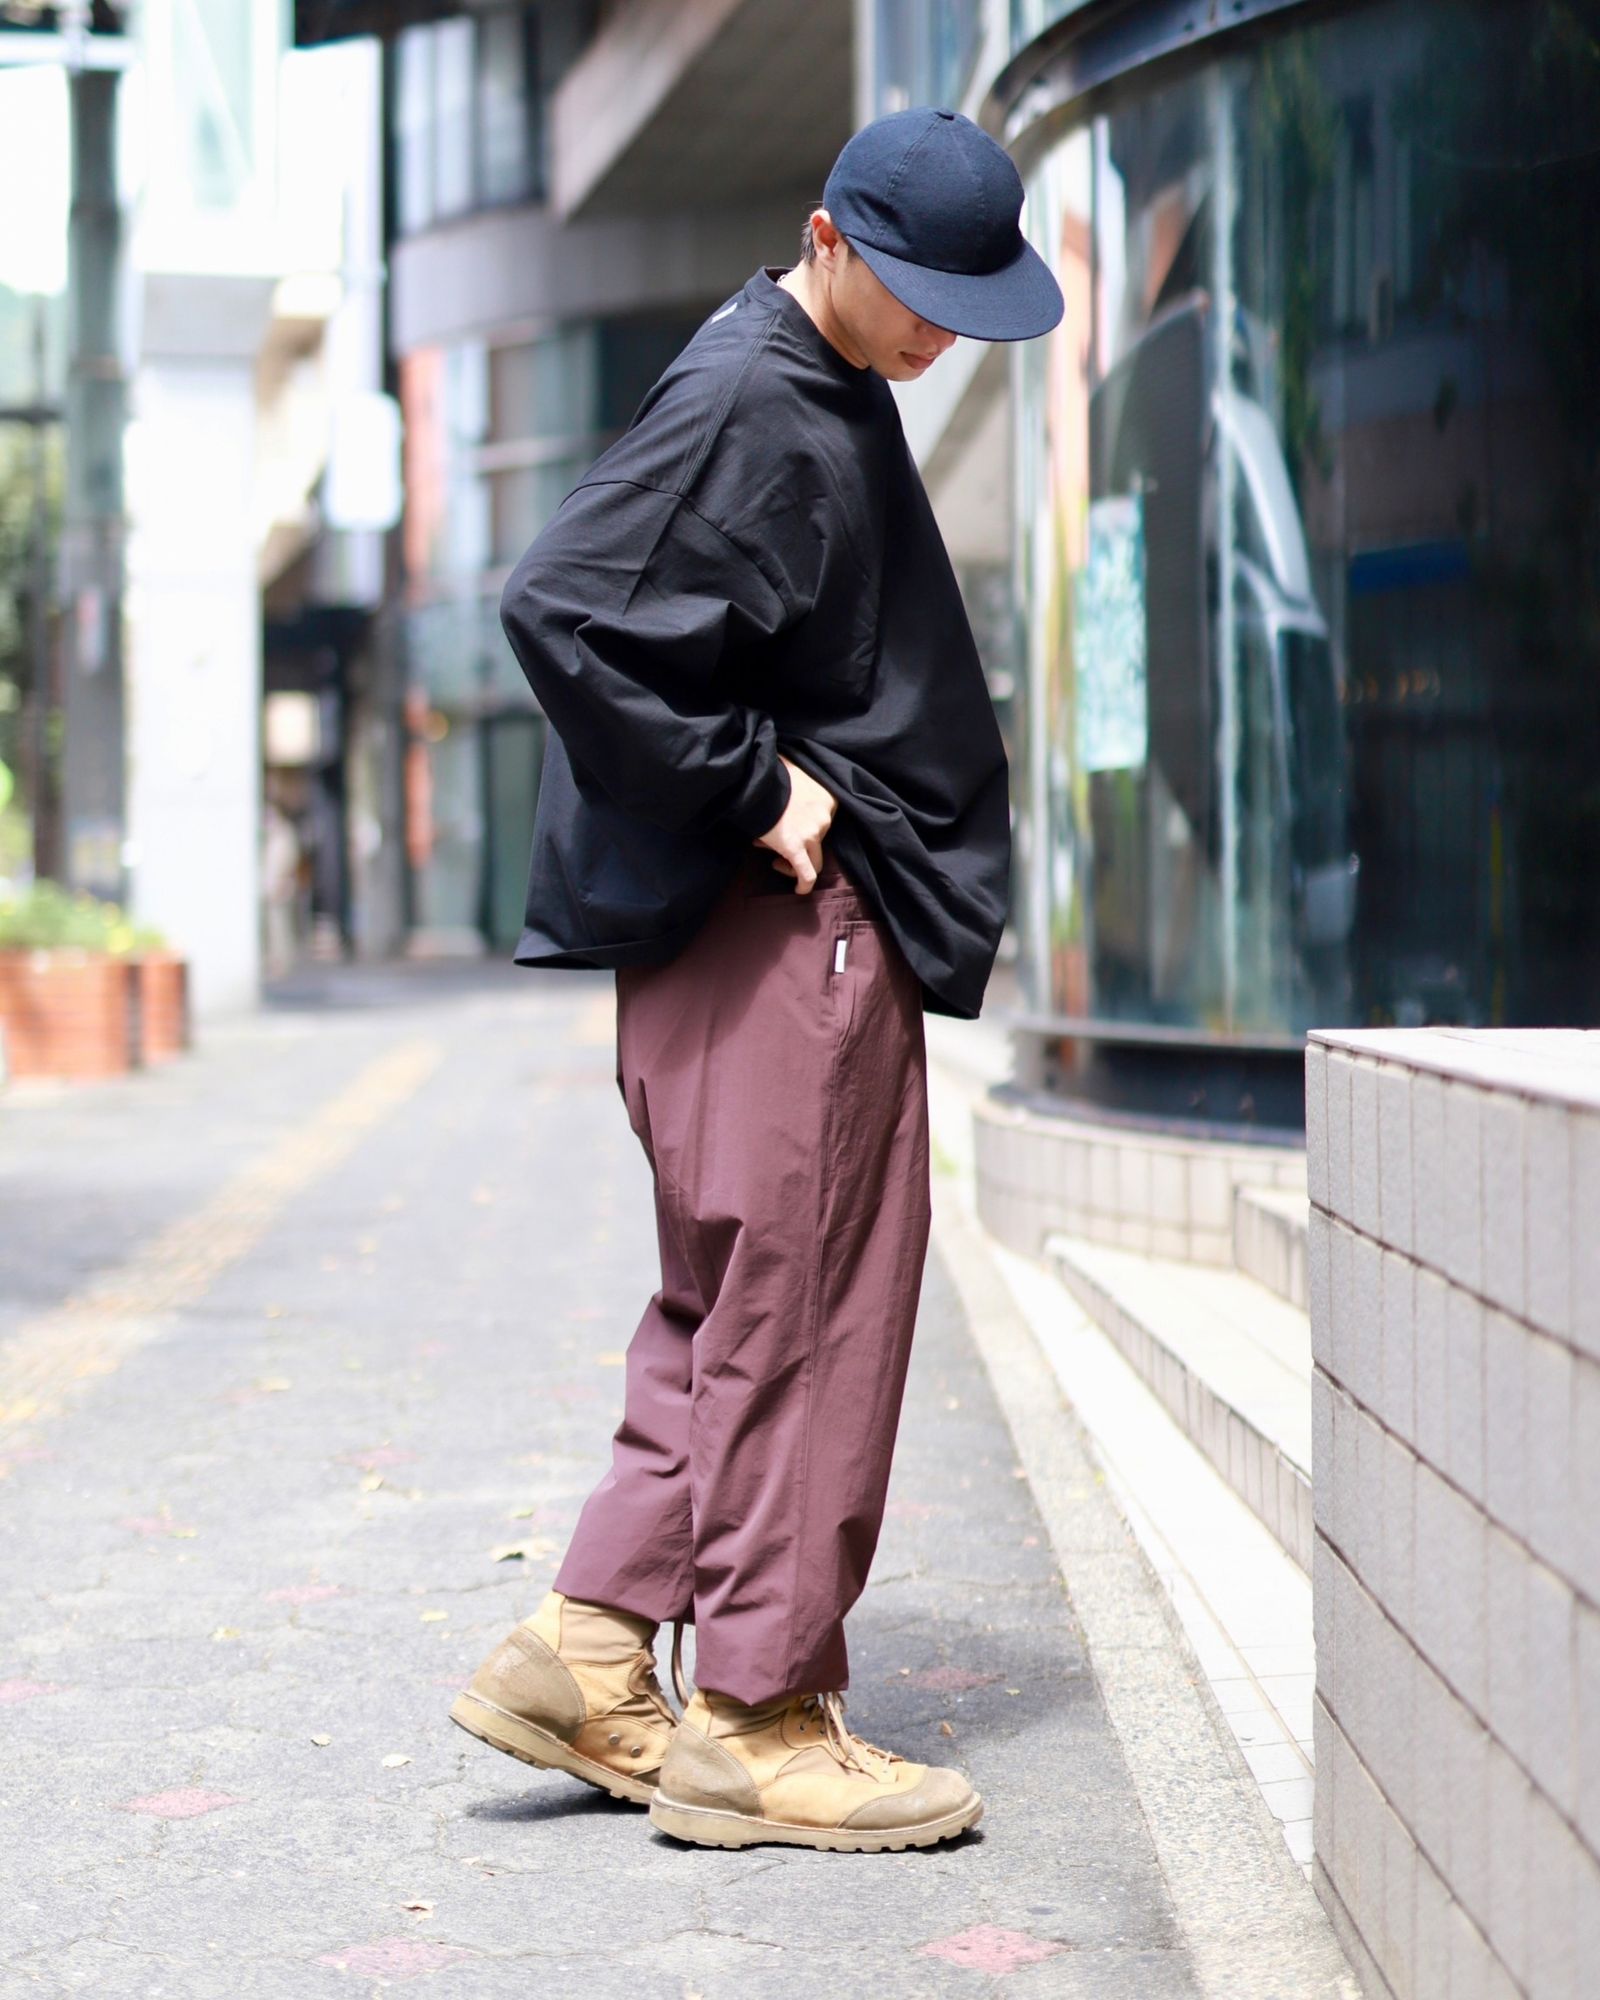 23AW S.F.C WIDE TAPERED EASY PANTS Navysonakamegu